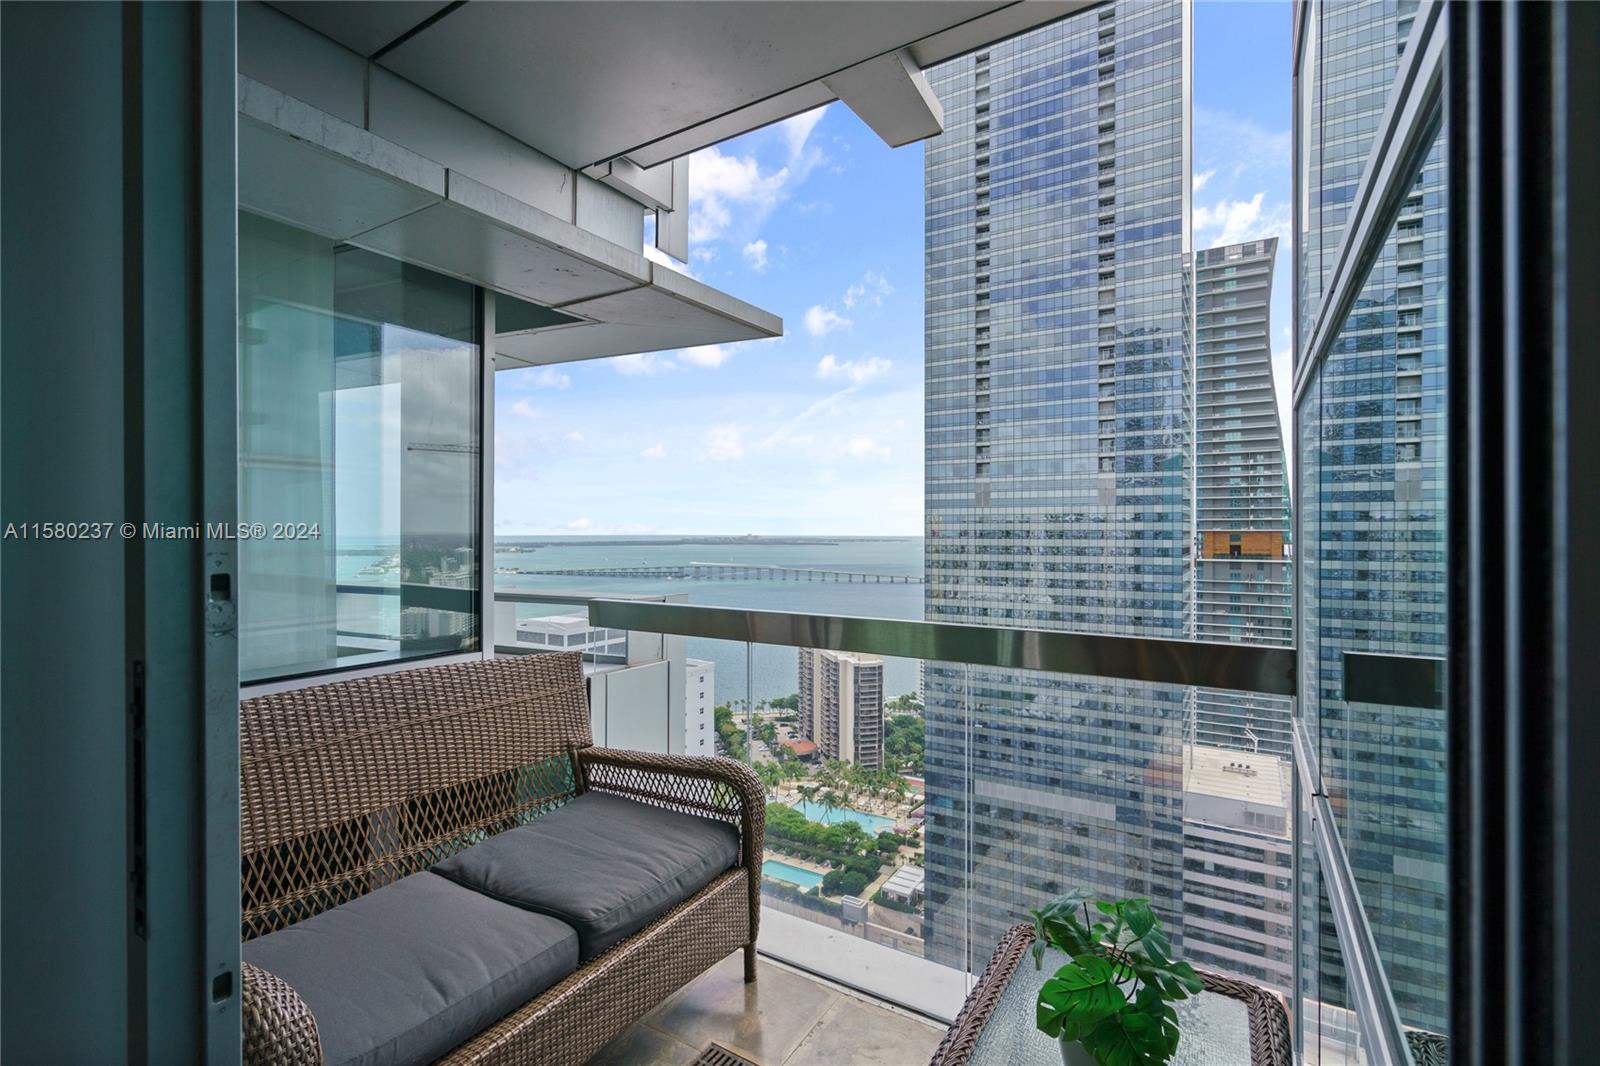 BEAUTIFUL 2 BED 2  BATH CORNER UNIT. AMAZING 360 VIEW TOWARDS BISCAYNE BAY AND BRICKELL AVENUE. THE UNIT IS  FULLY FURNISHED WITH 2 PARKING SPACES. THE NEWLY RENOVATED AKA HOTEL INCLUDES GYM, SPA, AND SWIMMING POOL. ENJOY THE RESTAURANT AND BAR ON THE 25TH FLOOR, ADRIFT MARE, FROM THE MICHELIN STARRED CHEF DAVID MYERS. COME LIVE IN THE HEART OF BRICKELL STEPS AWAY FROM THE BEST RESTAURANTS, ENTERTAINMENT, AND TRANSPORTATION. * RENTAL TERM 6 MONTHS